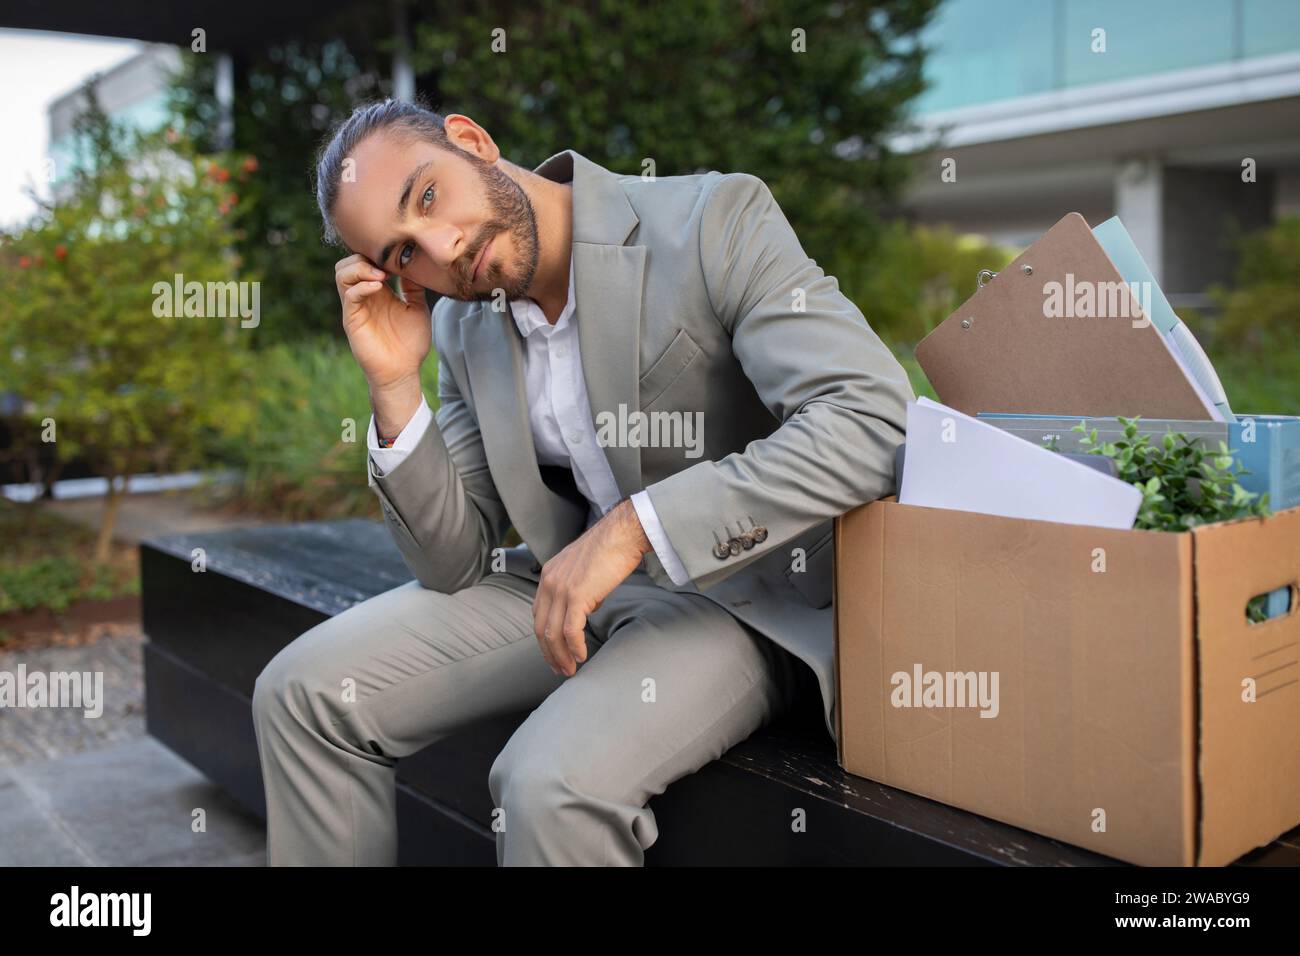 Thoughtful young businessman sitting on bench with a box of personal items Stock Photo